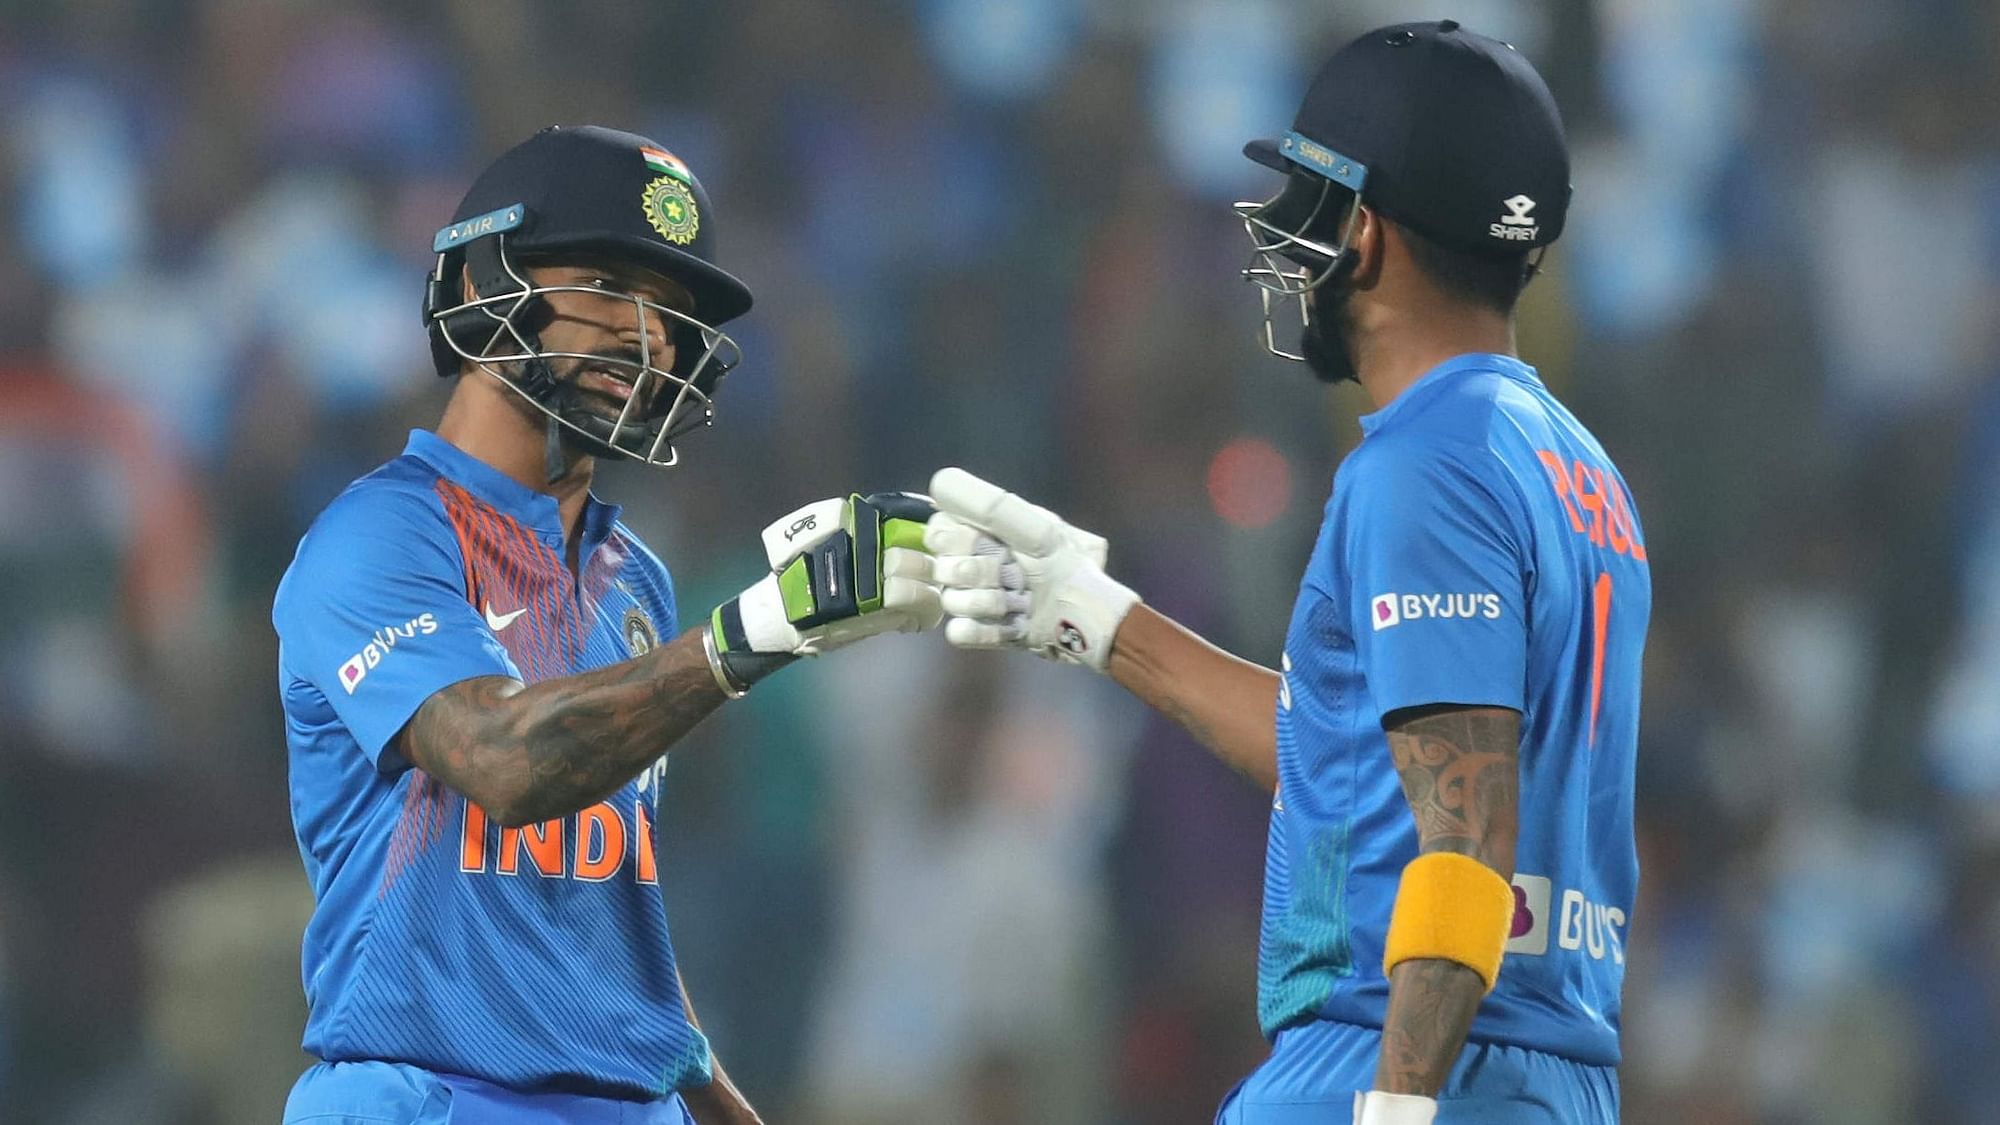 Shikhar Dhawan (left) and KL Rahul (right) put up 97 runs for the opening wicket as India beat Sri Lanka in the third T20I in Pune on Friday.